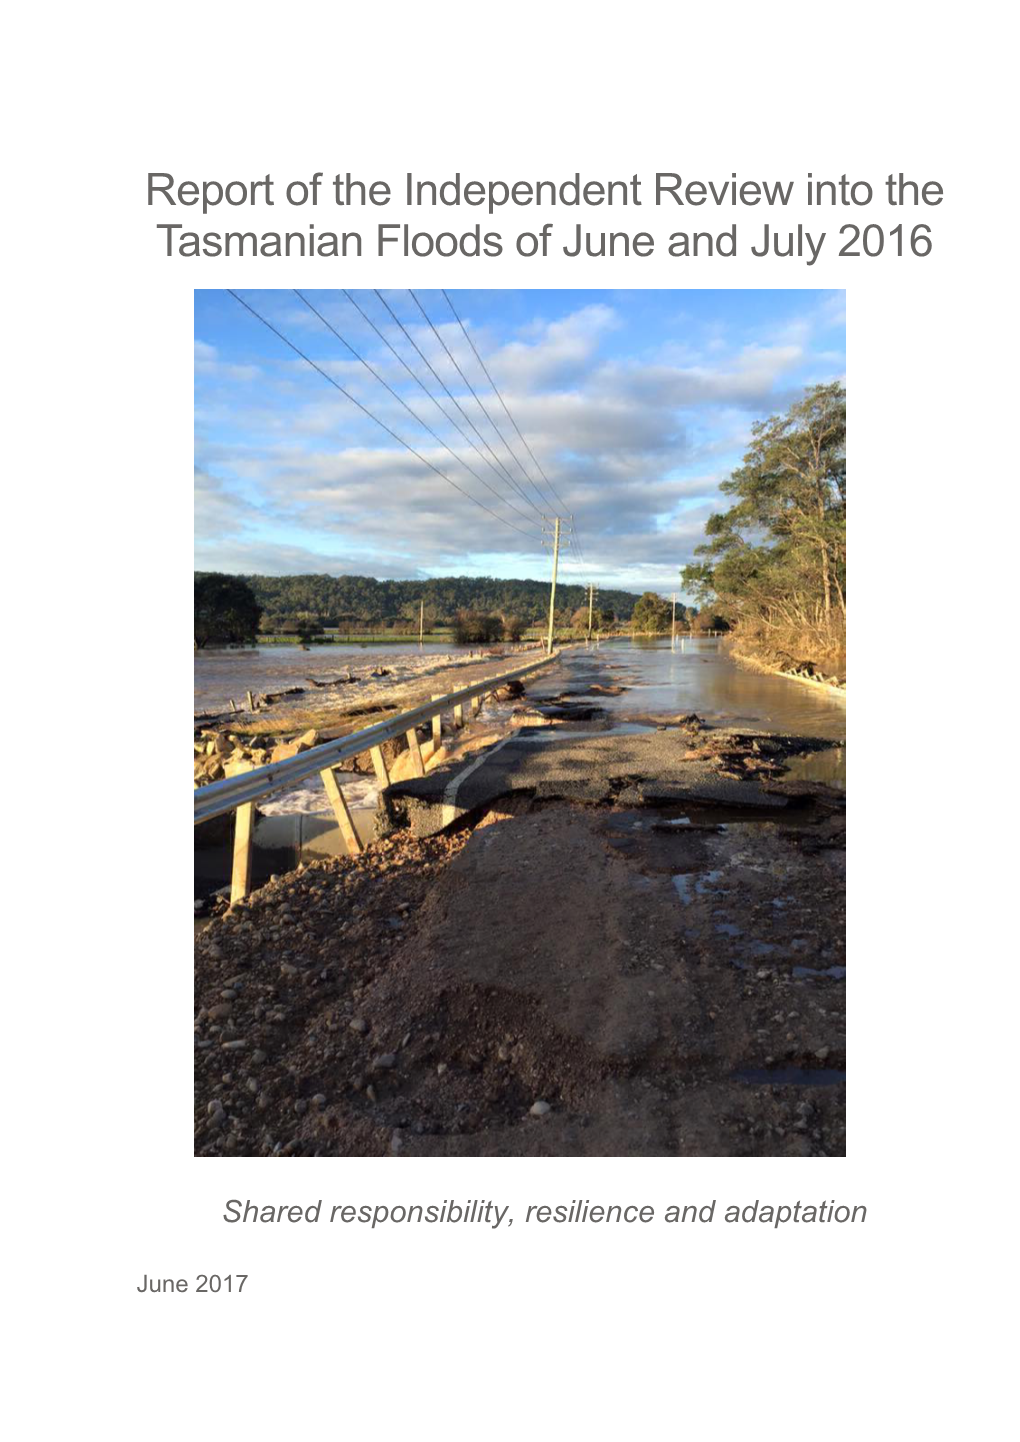 Report of the Independent Review Into the Tasmanian Floods of June and July 2016